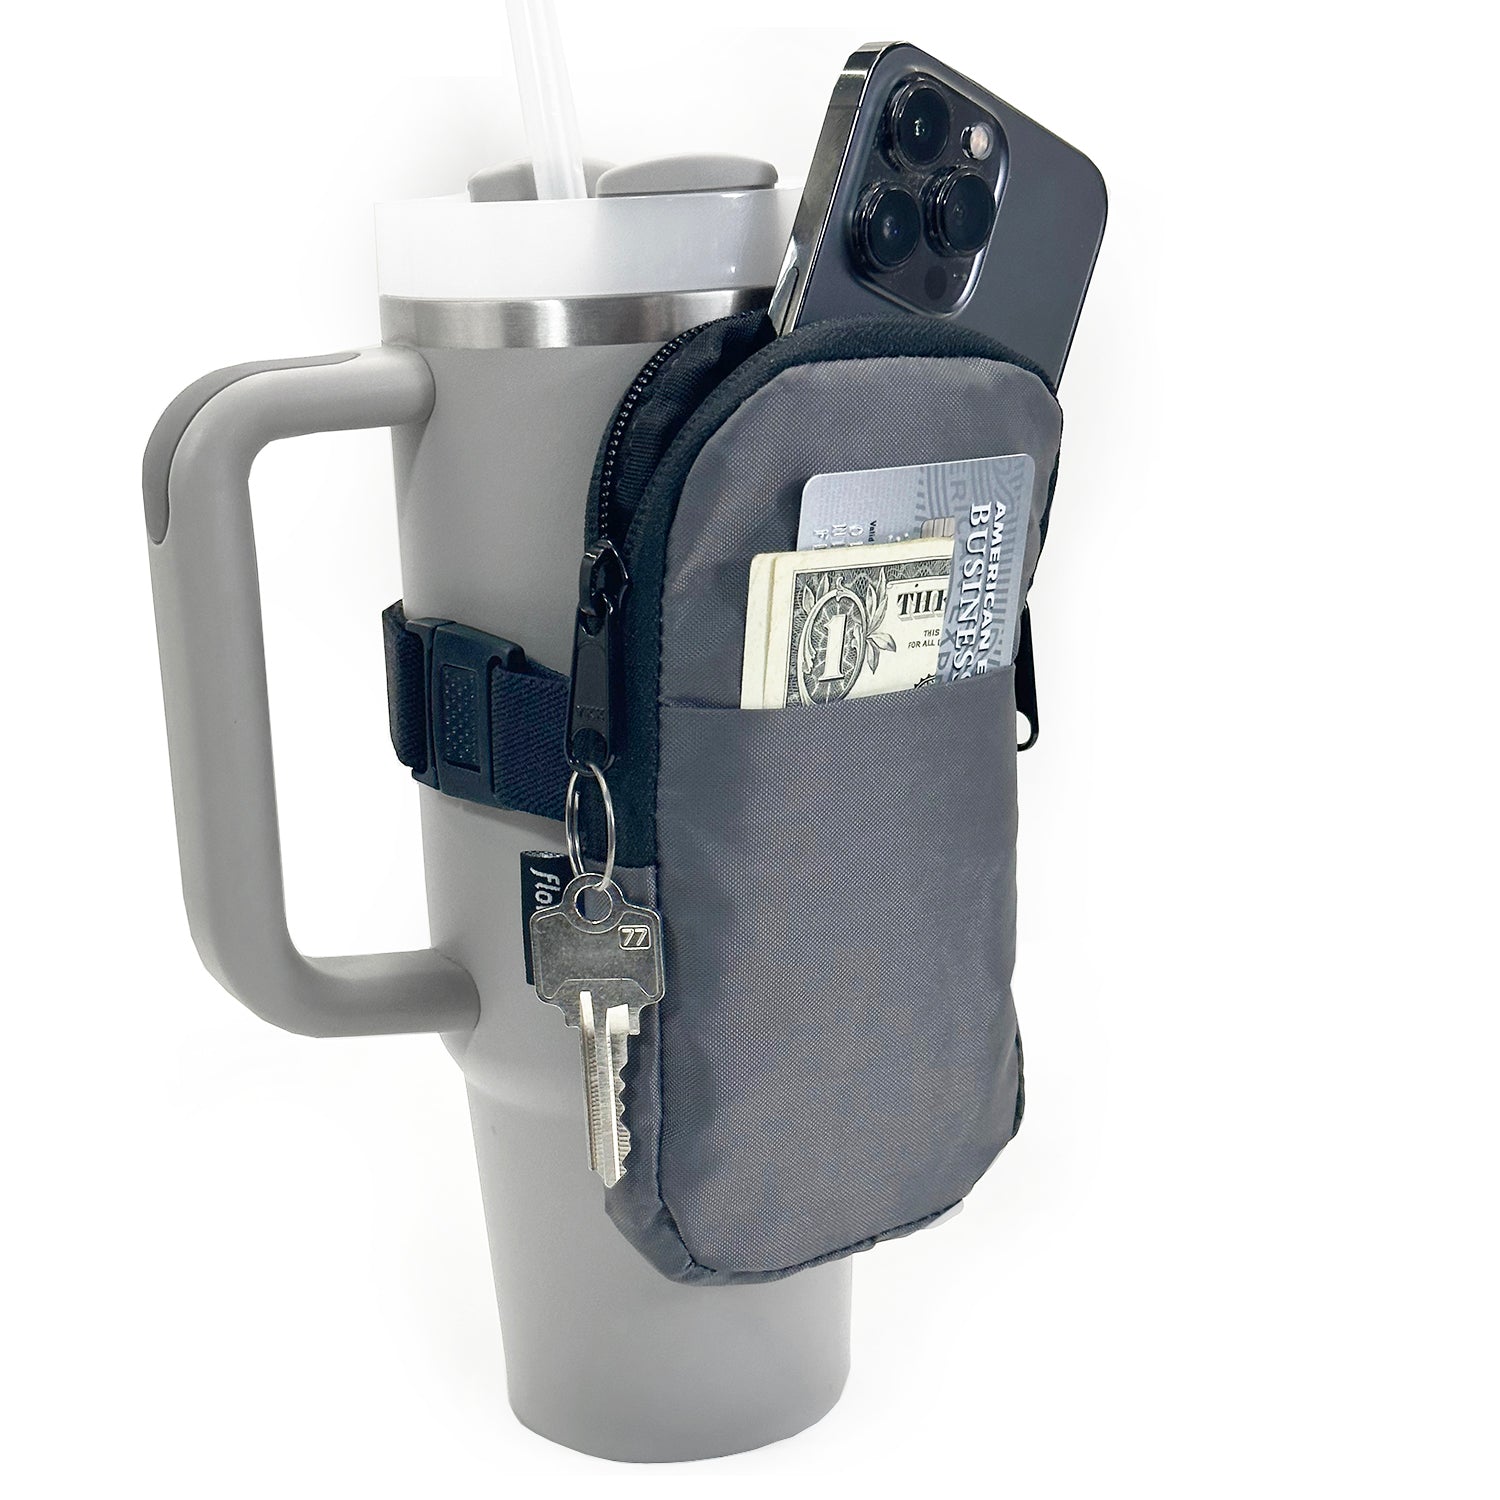 WaterBottlePouch_Grey_oncupcontents1_78940a83-cbfe-44fe-82a7-f4e0ef2c26ea.jpg